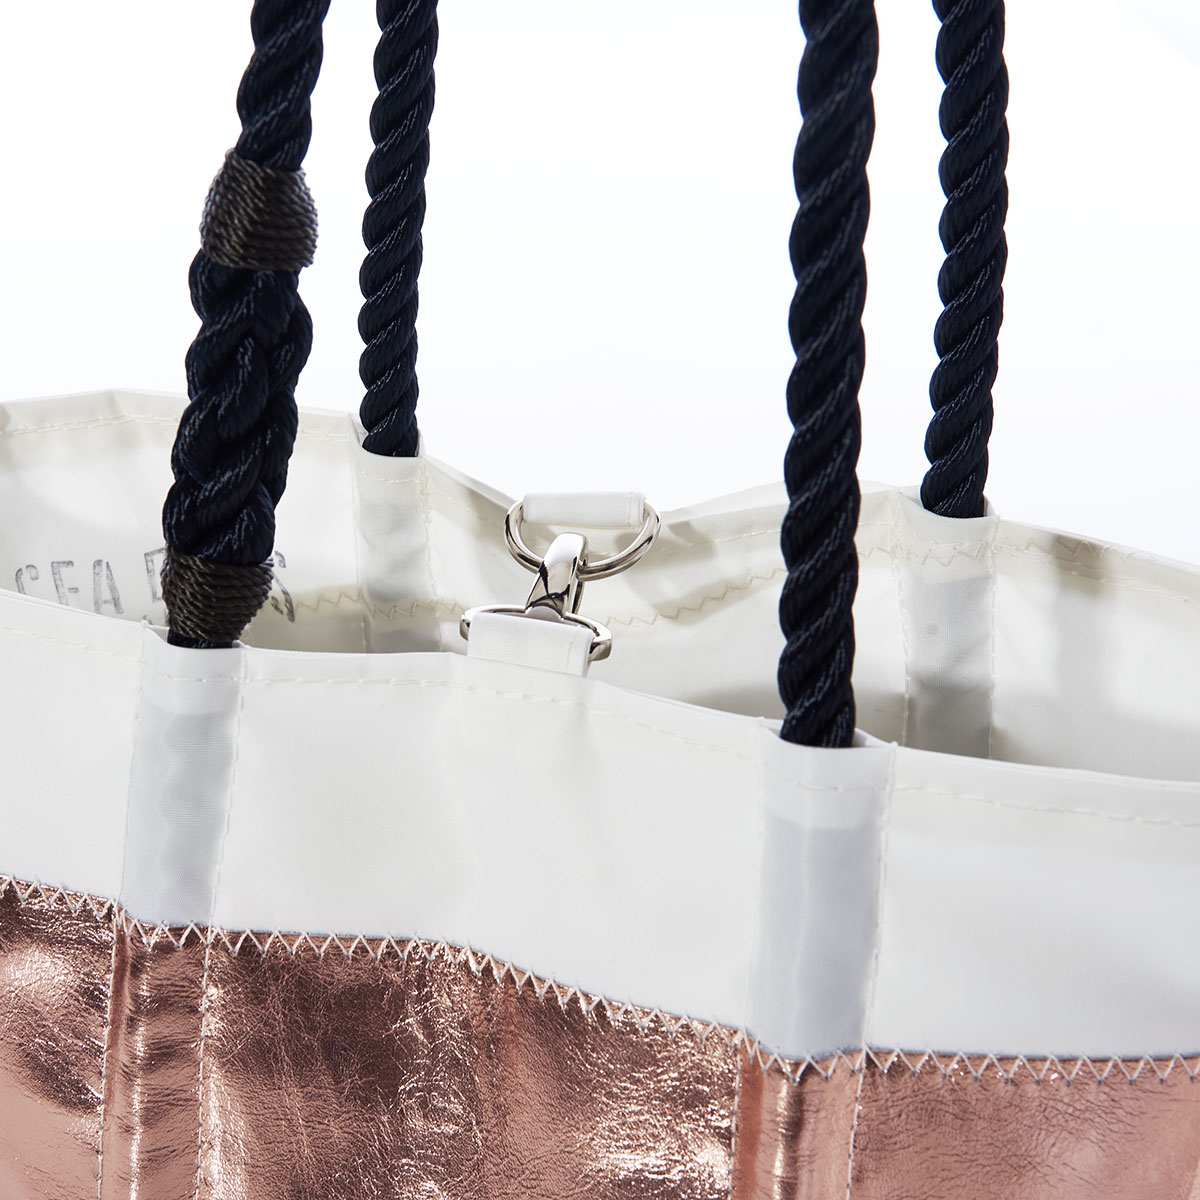 close up of clasp closure of tote with stripes of white, rose gold leather applique, and navy and white sailor stripes on a recycled sail cloth handbag with navy rope handles